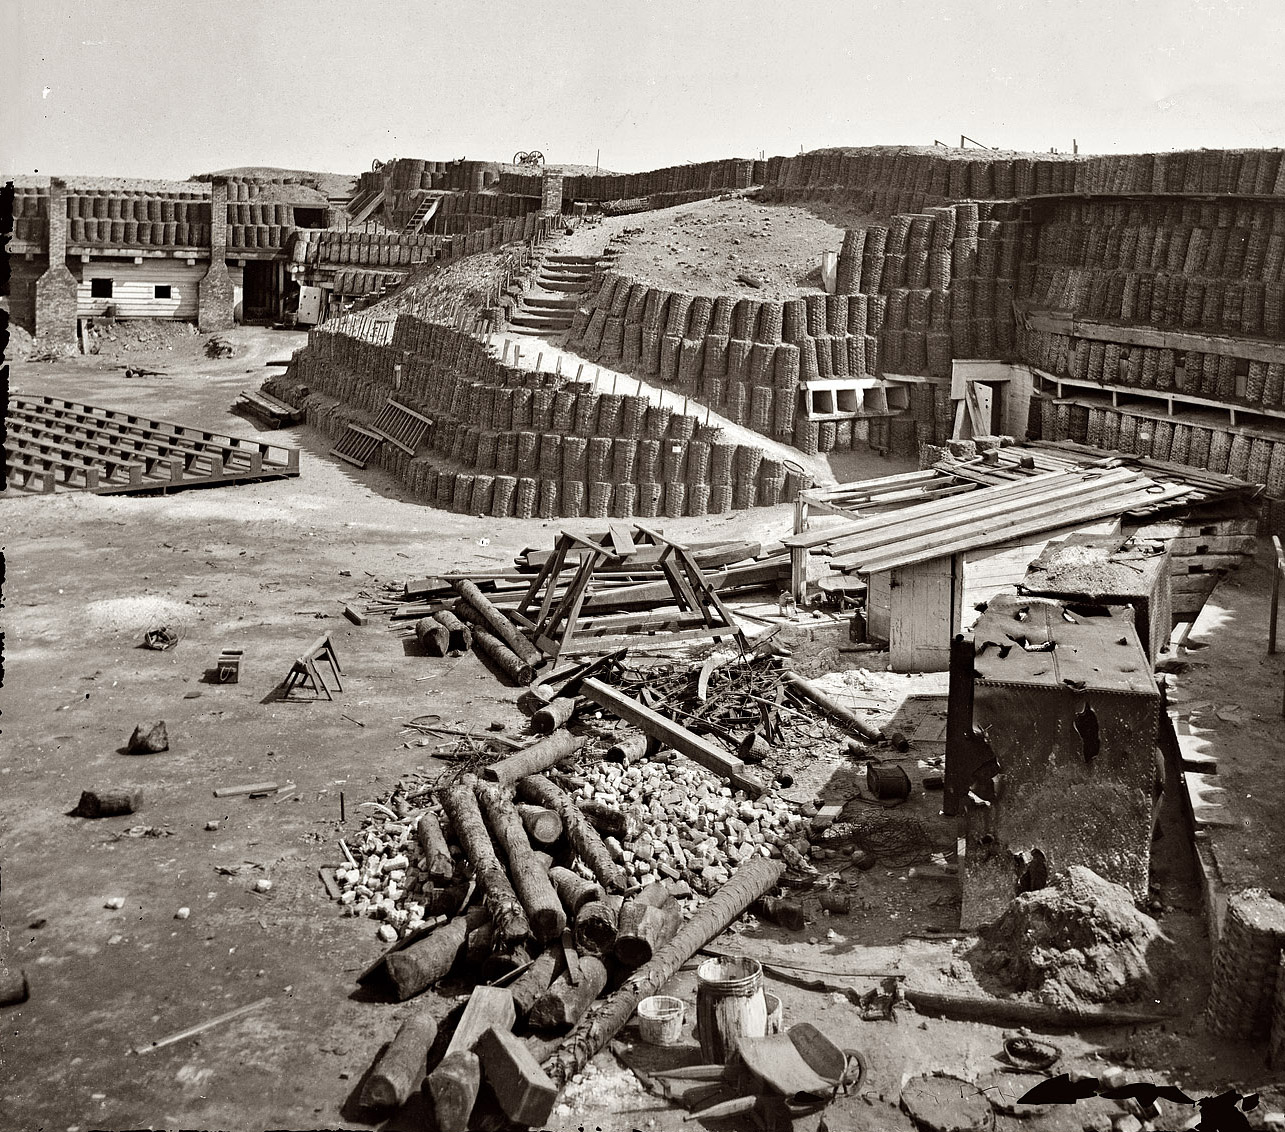 1865. "Charleston, South Carolina. Interior of Fort Sumter, with gabion reinforcements. Photograph of the Federal Navy, and seaborne expeditions against the Atlantic Coast of the Confederacy." View full size. Left half of a wet-collodion glass-plate stereograph. Now a Juniper Gallery fine-art print.